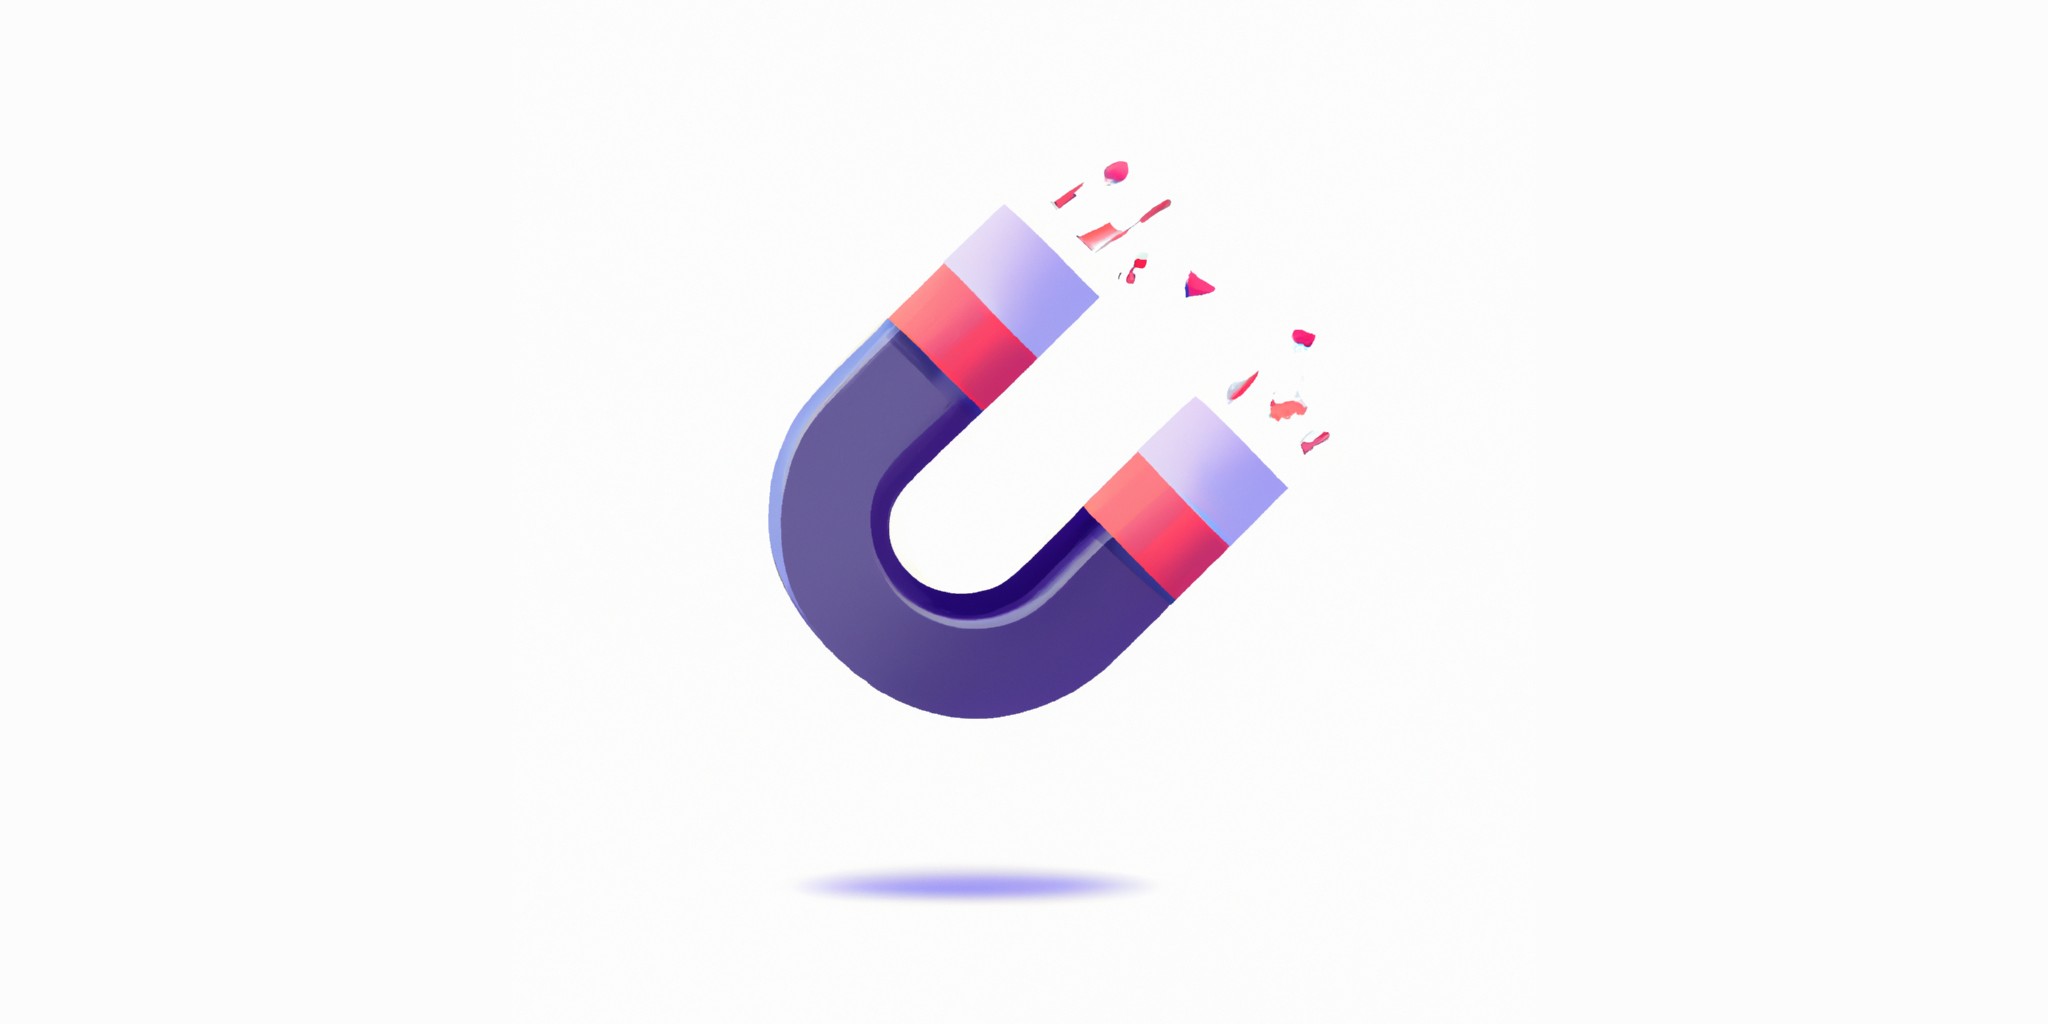 a magnet in flat illustration style with gradients and white background